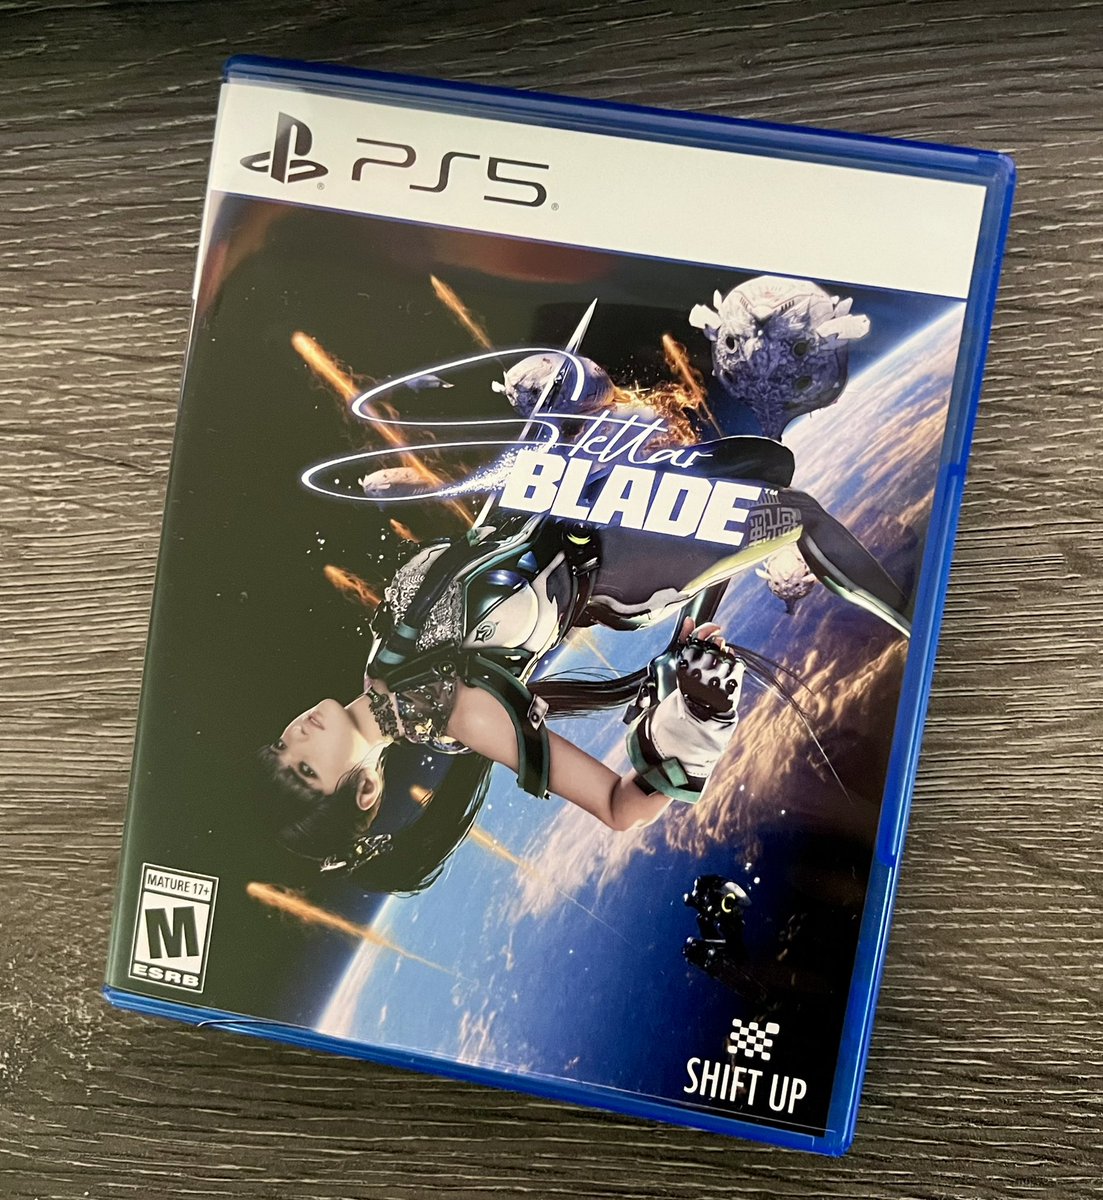 ✨ STELLAR BLADE GIVEAWAY ✨ I have a physical copy up for grabs, the only way to play uncensored pre-patch, proof physical media still has value in the current gen! For a chance to win: ☑️Follow ☑️Repost ☑️Tag a friend Drawing 11pm ET May 13th #PS5 #PlayStation #StellarBlade